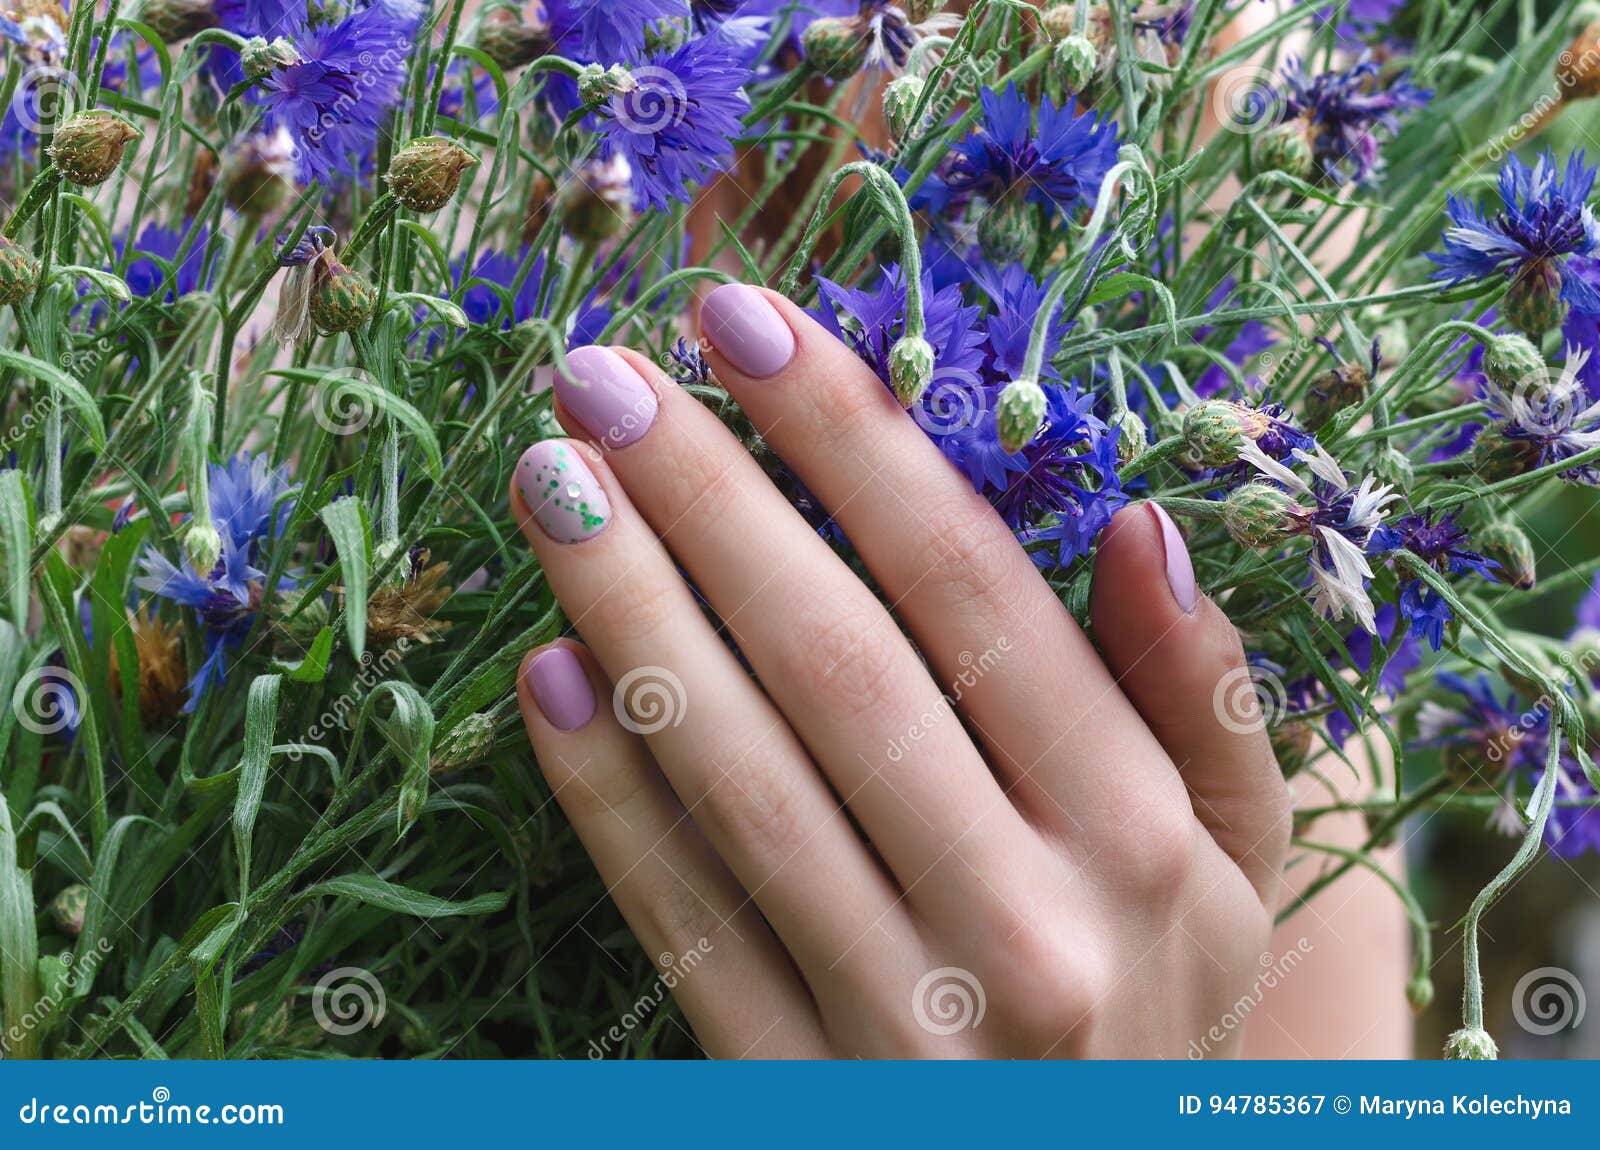 4. "Lilac and Floral Nail Design on Tumblr" - wide 3